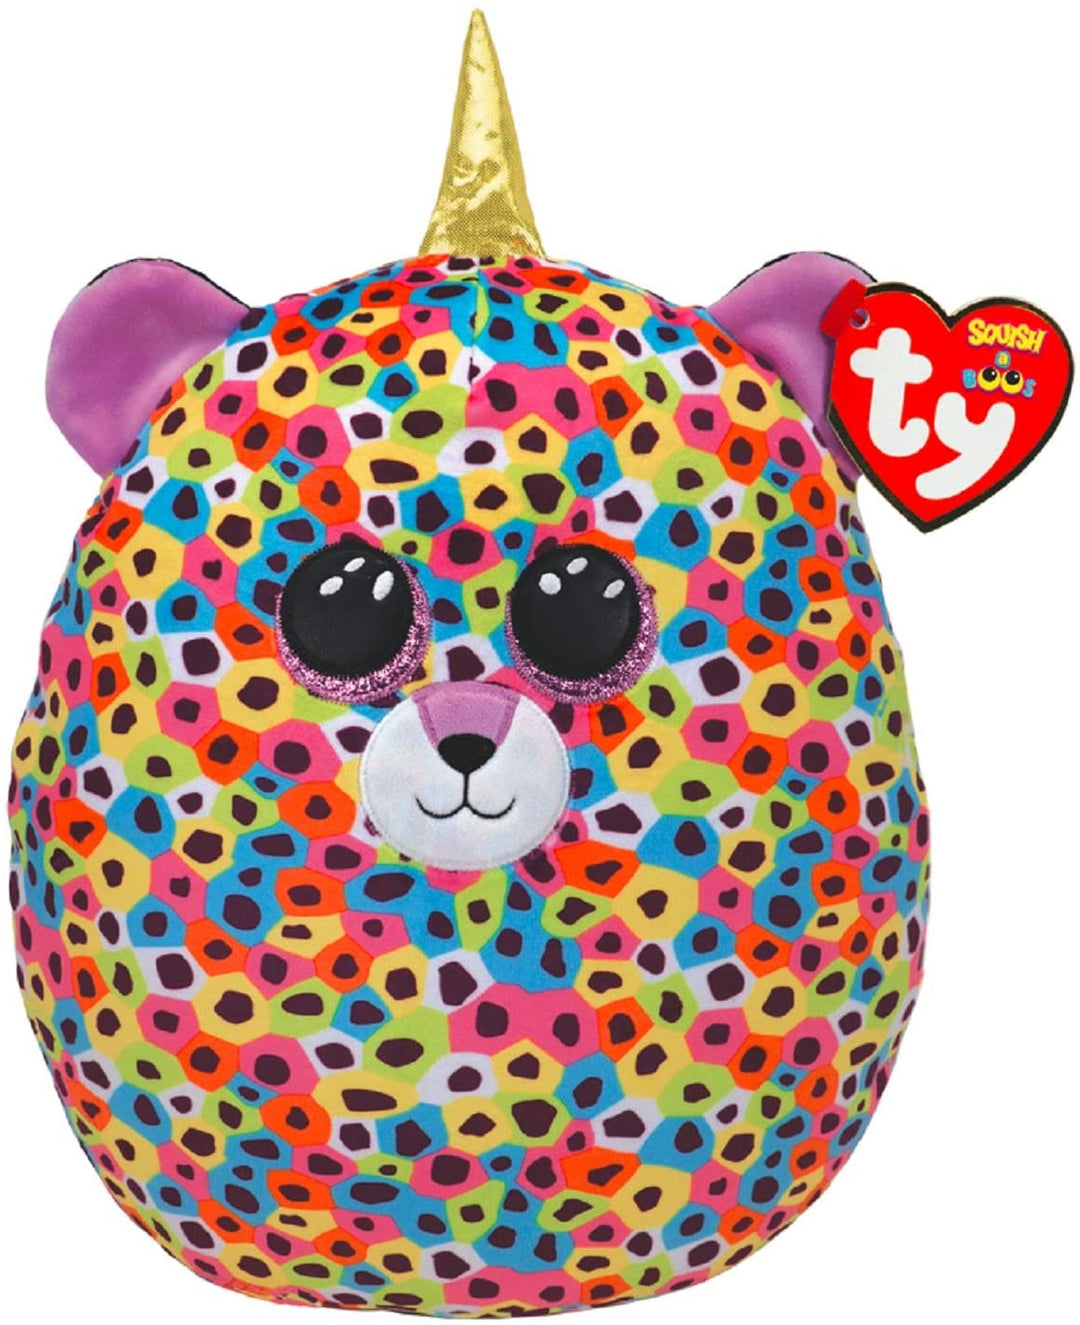 Ty UK Ltd 39188 Giselle Leopard Squish A Boo Plush Toy, Multicoloured, 12"